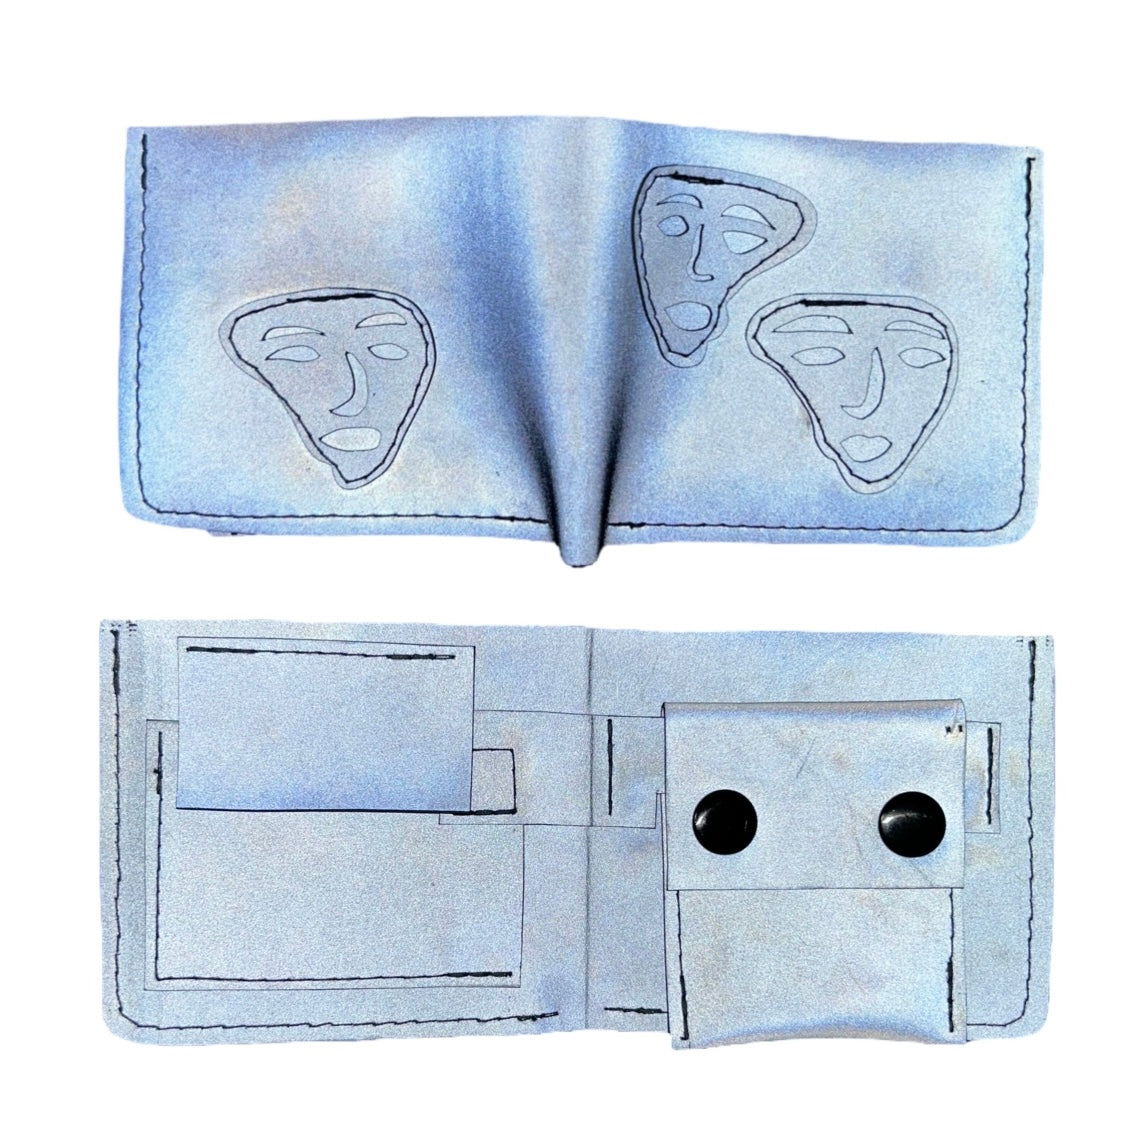 Plastered Faces 3MM Reflective Wallet